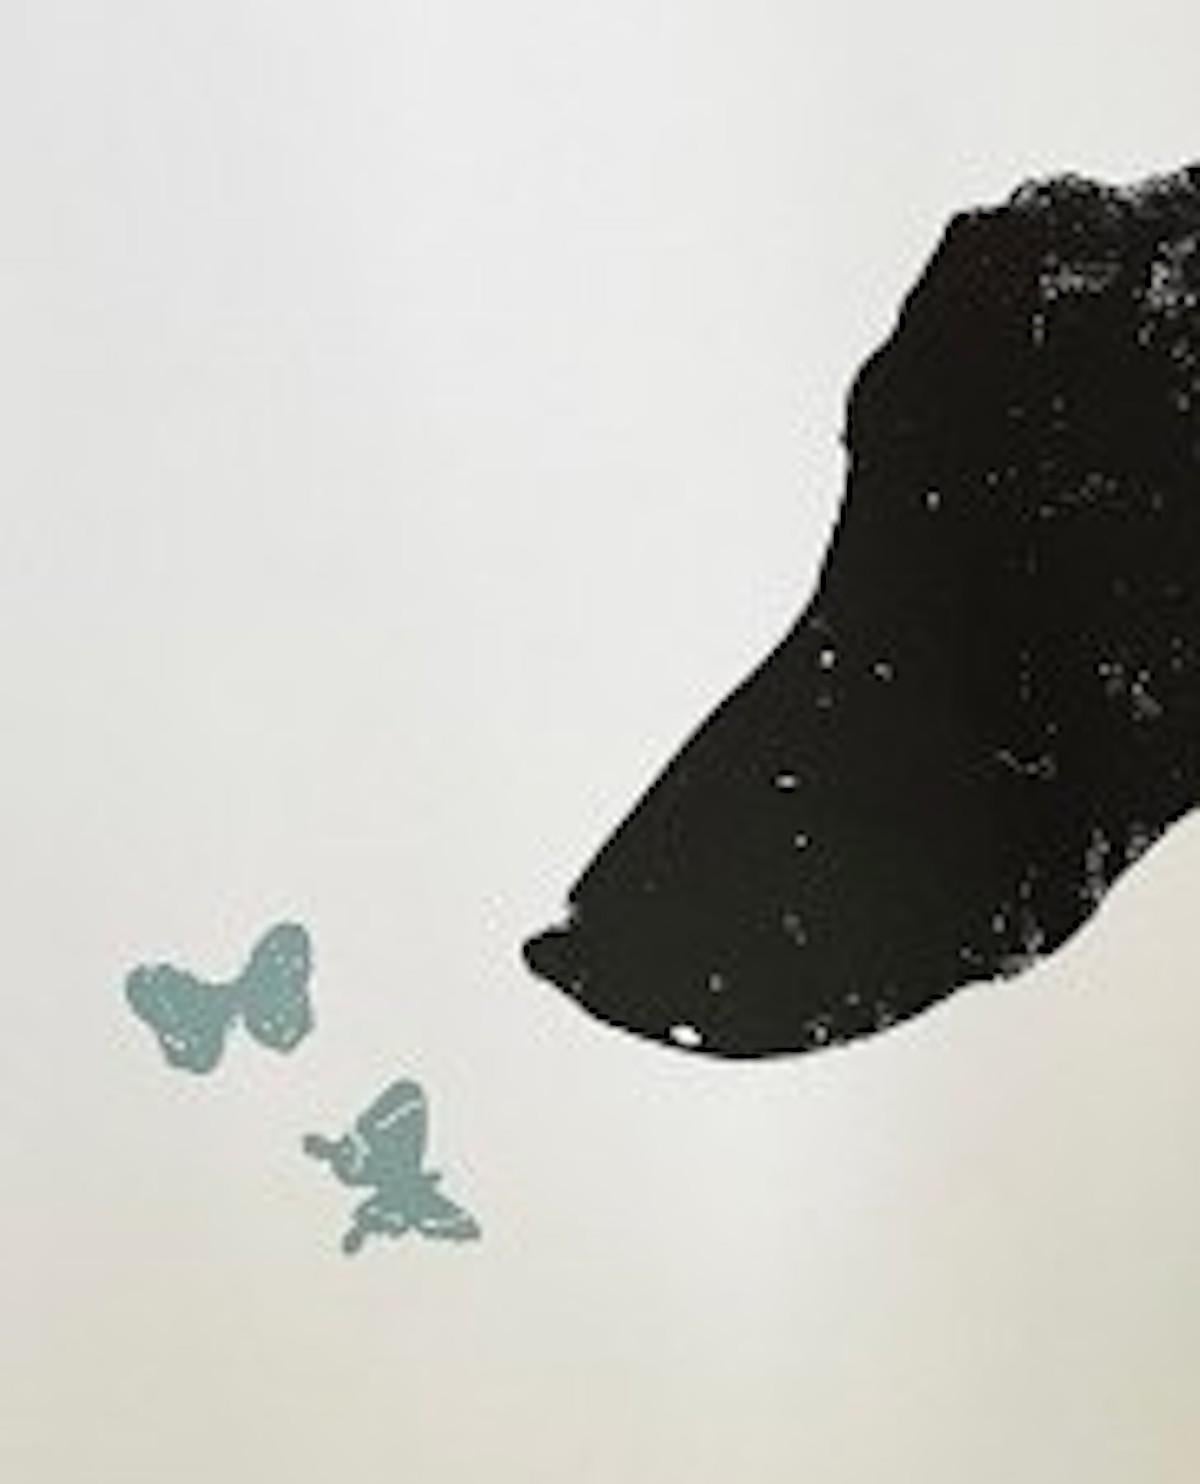 Intrigue II' Original Handmade Silkscreen Print. A playful illustration portraying the idea of Intrigue as the dog plays and sniffs at some fluttering butterflies, humorous and thought-provoking. Part of a collection of works exploring the symbolism